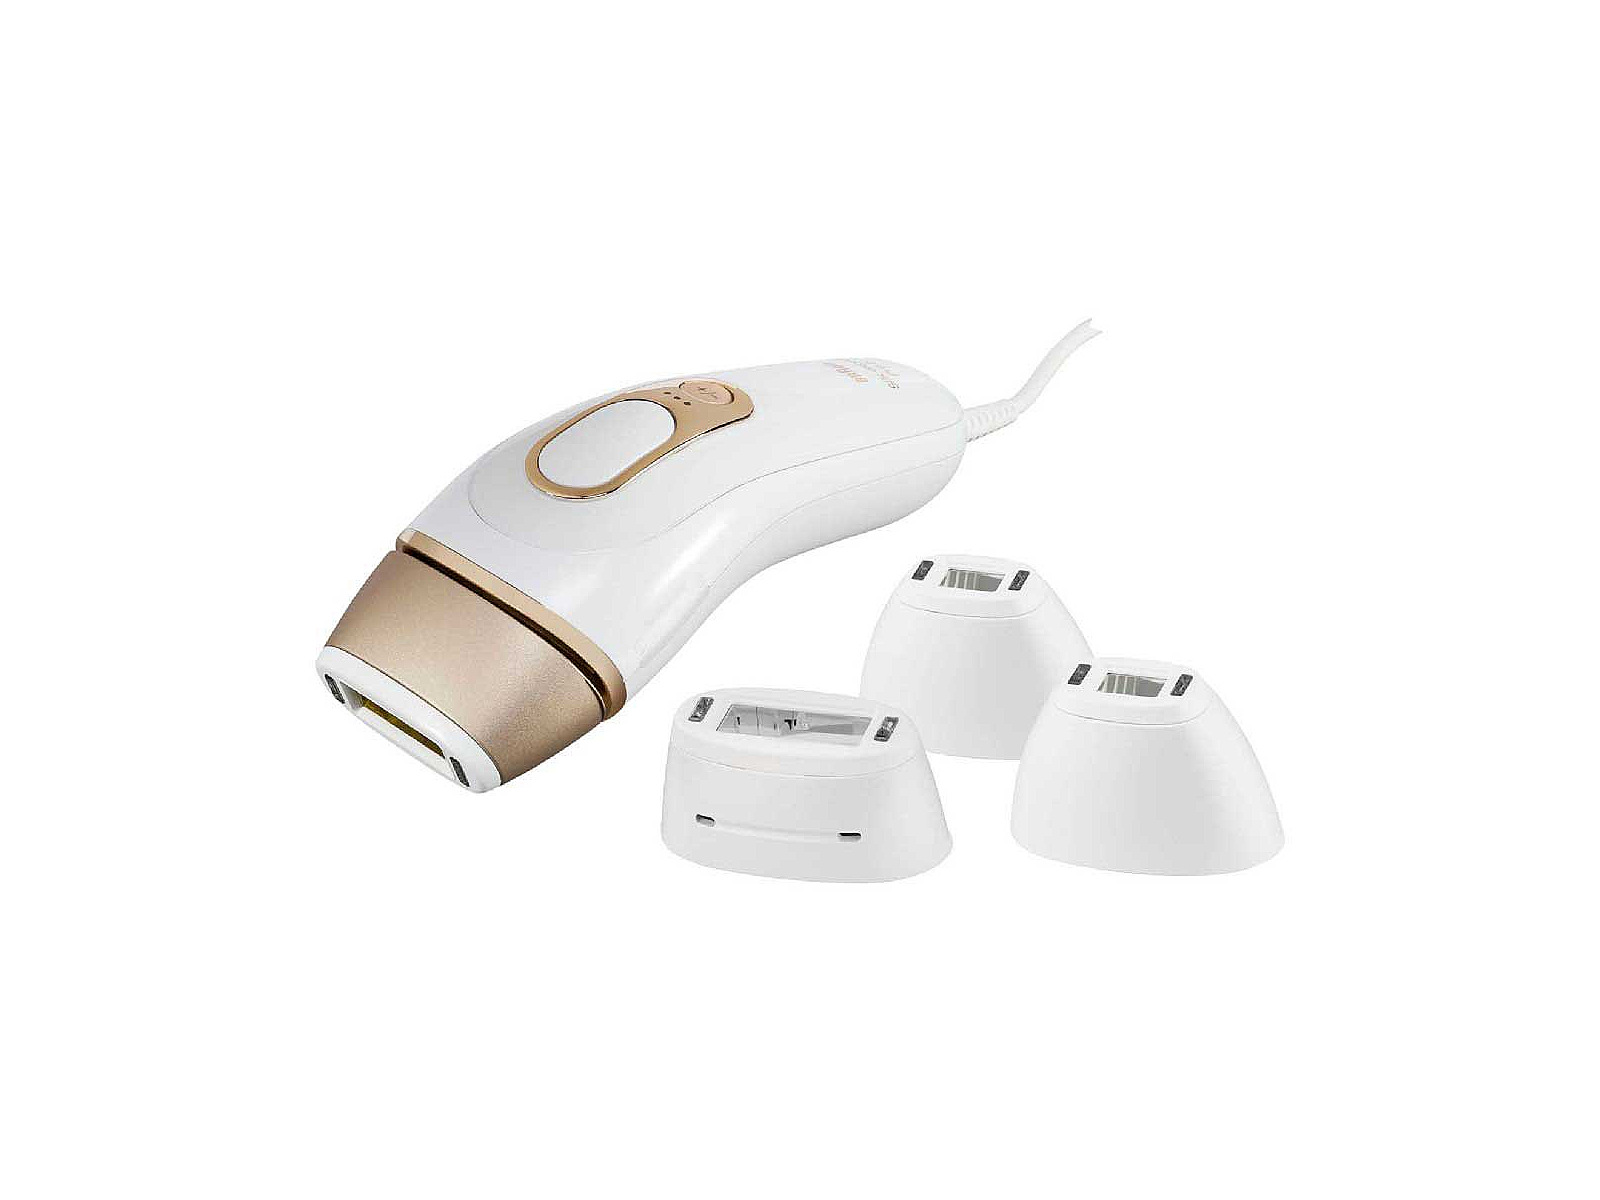 Braun Silk-expert Pro 5 PL5137 IPL Hair Removal Device with 3 Extras